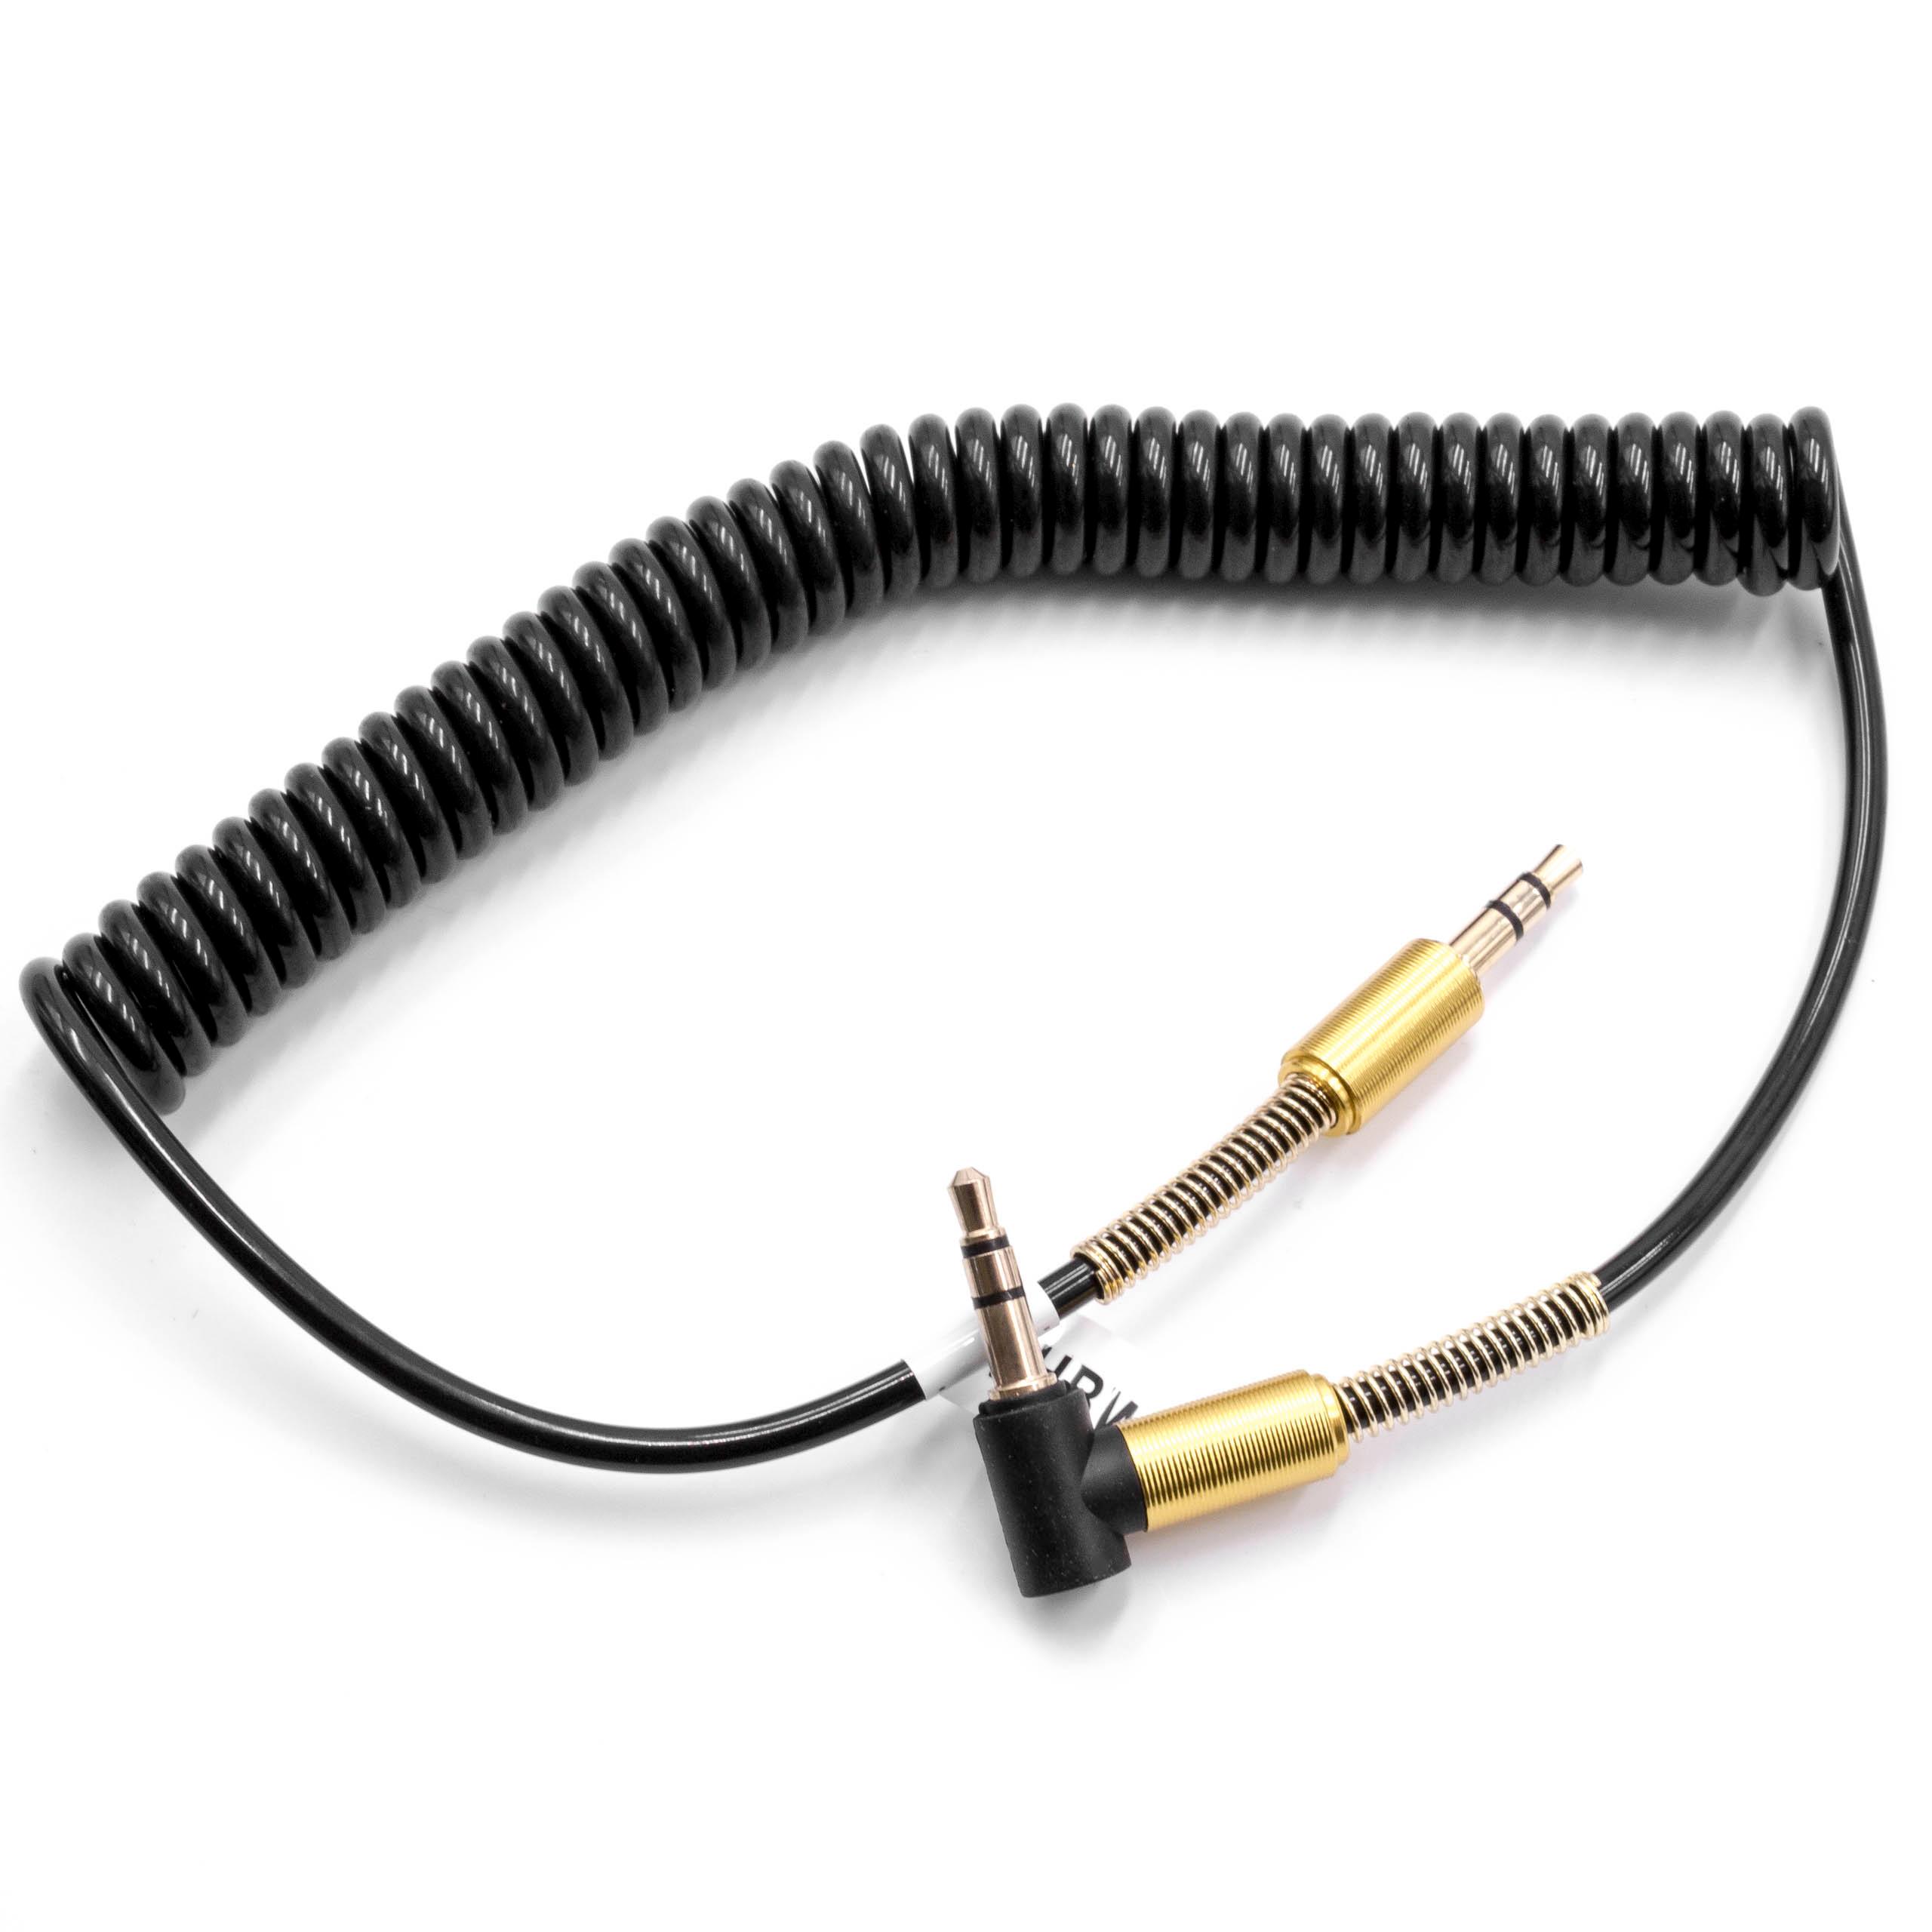 Stereo AUX Audio Cable Jack Adapter 3.5mm to 3.5mm - male to male, gold plated, right angle, gold / black